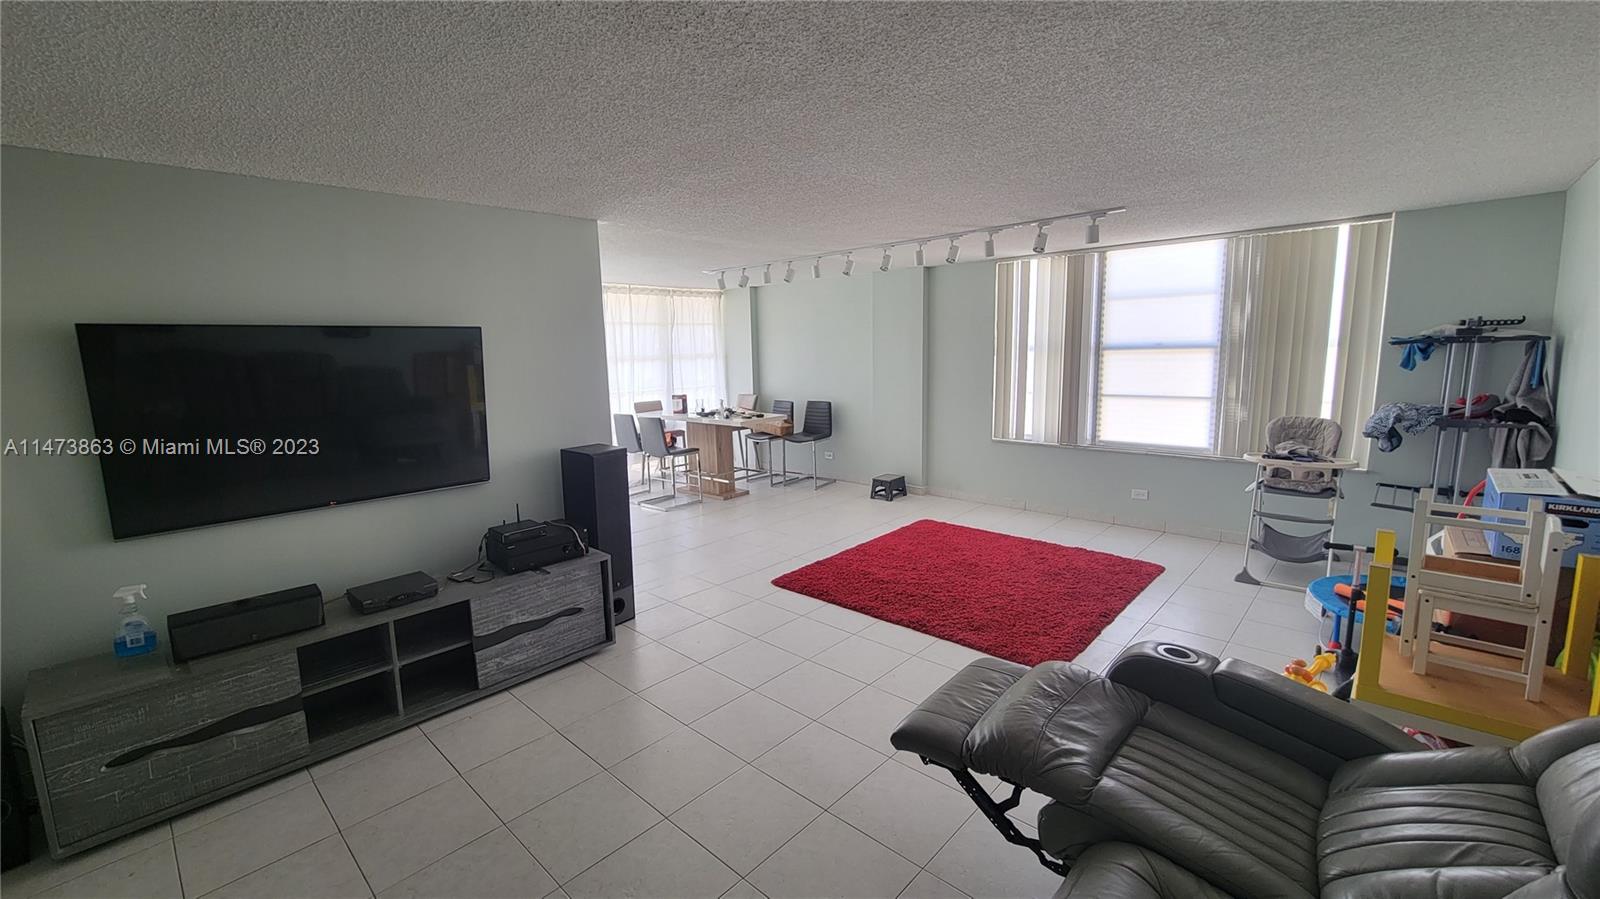 Address Not Disclosed, Sunny Isles Beach, Miami-Dade County, Florida - 2 Bedrooms  
2 Bathrooms - 